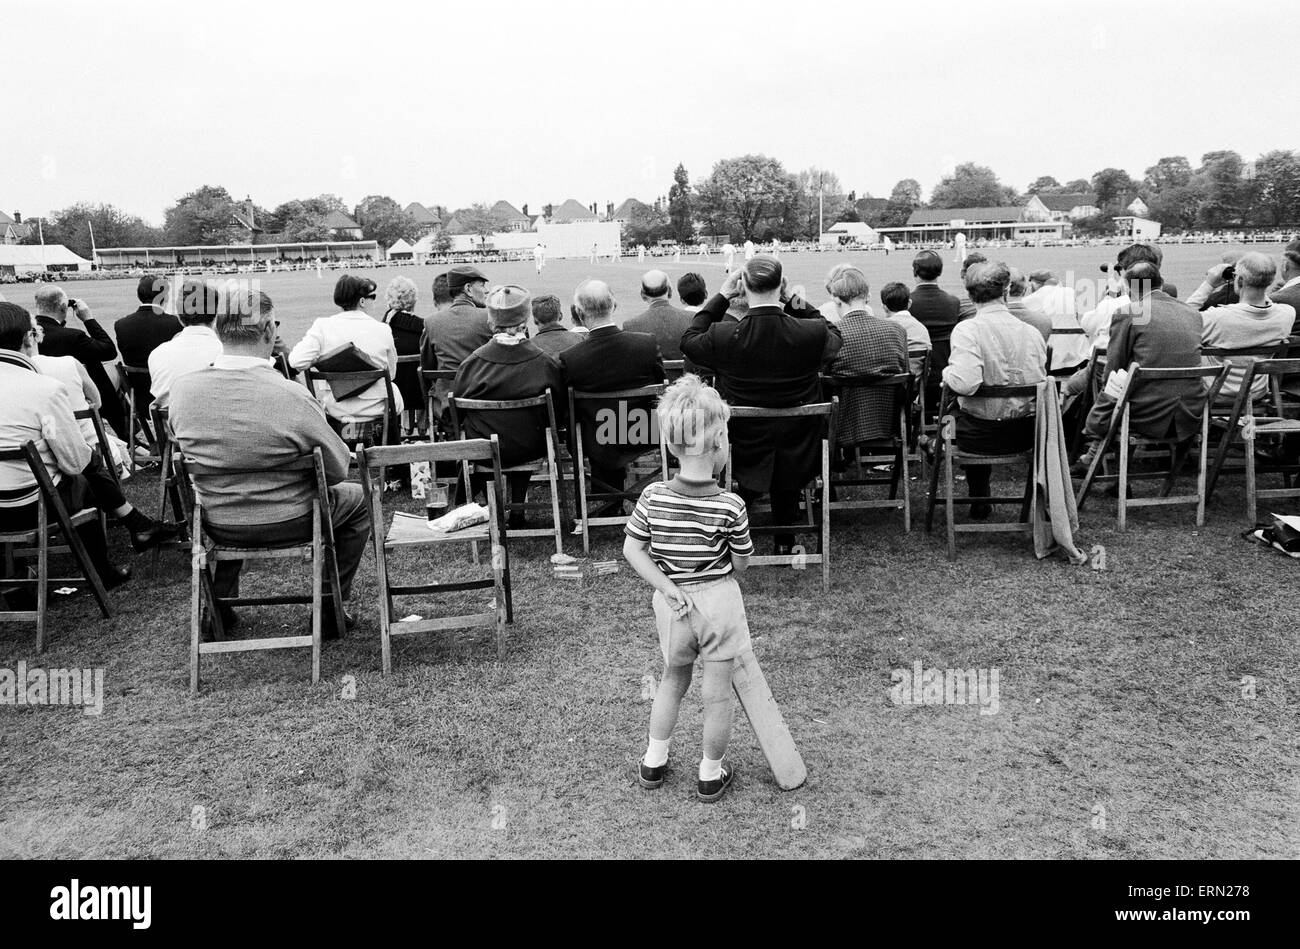 For the first time County cricket was played on a Sunday. The match between Essex and Somerset took place at Valentine's Park in Ilford. Crowds in chairs watching the match. 15th May 1966. Stock Photo